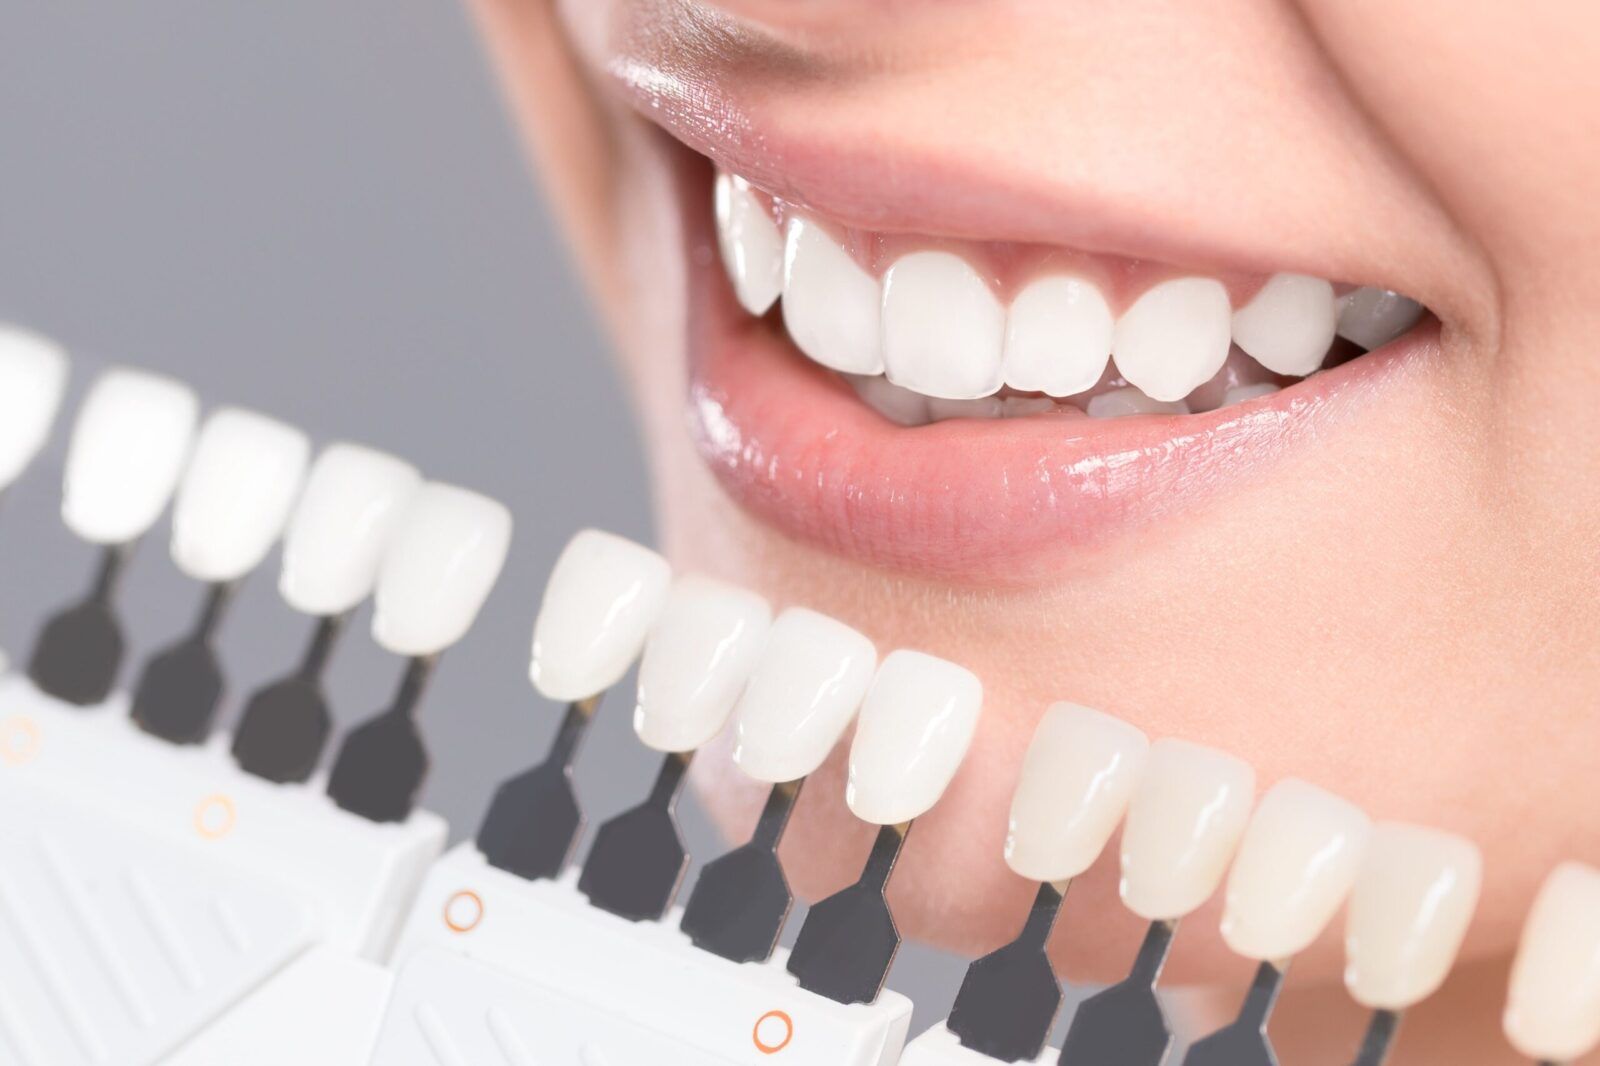 teeth against whitening shade guide